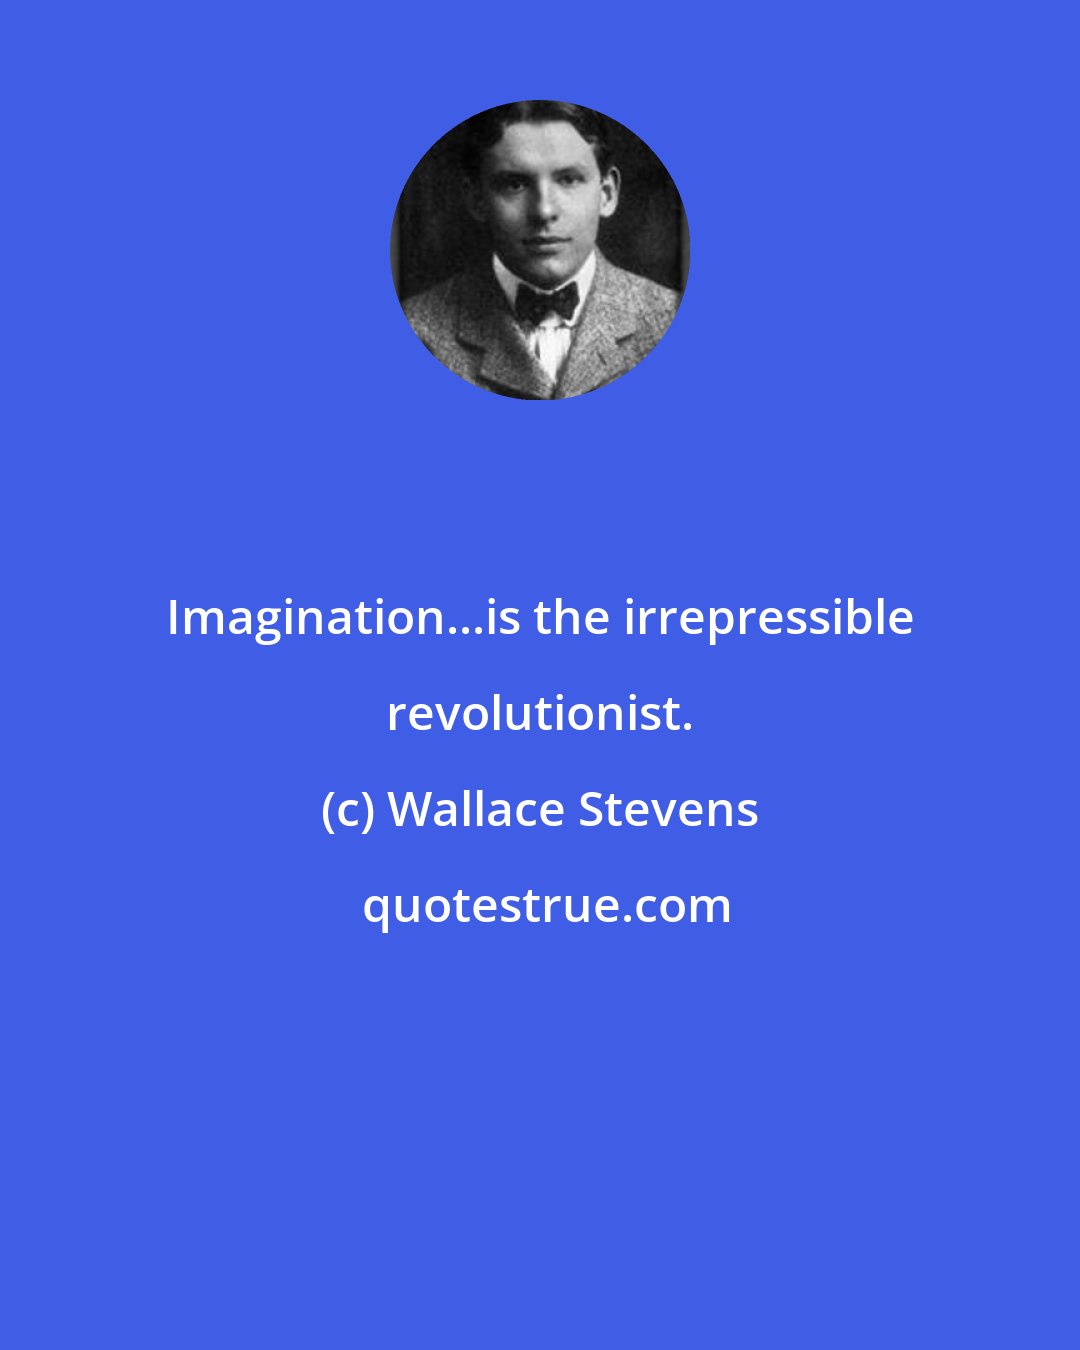 Wallace Stevens: Imagination...is the irrepressible revolutionist.